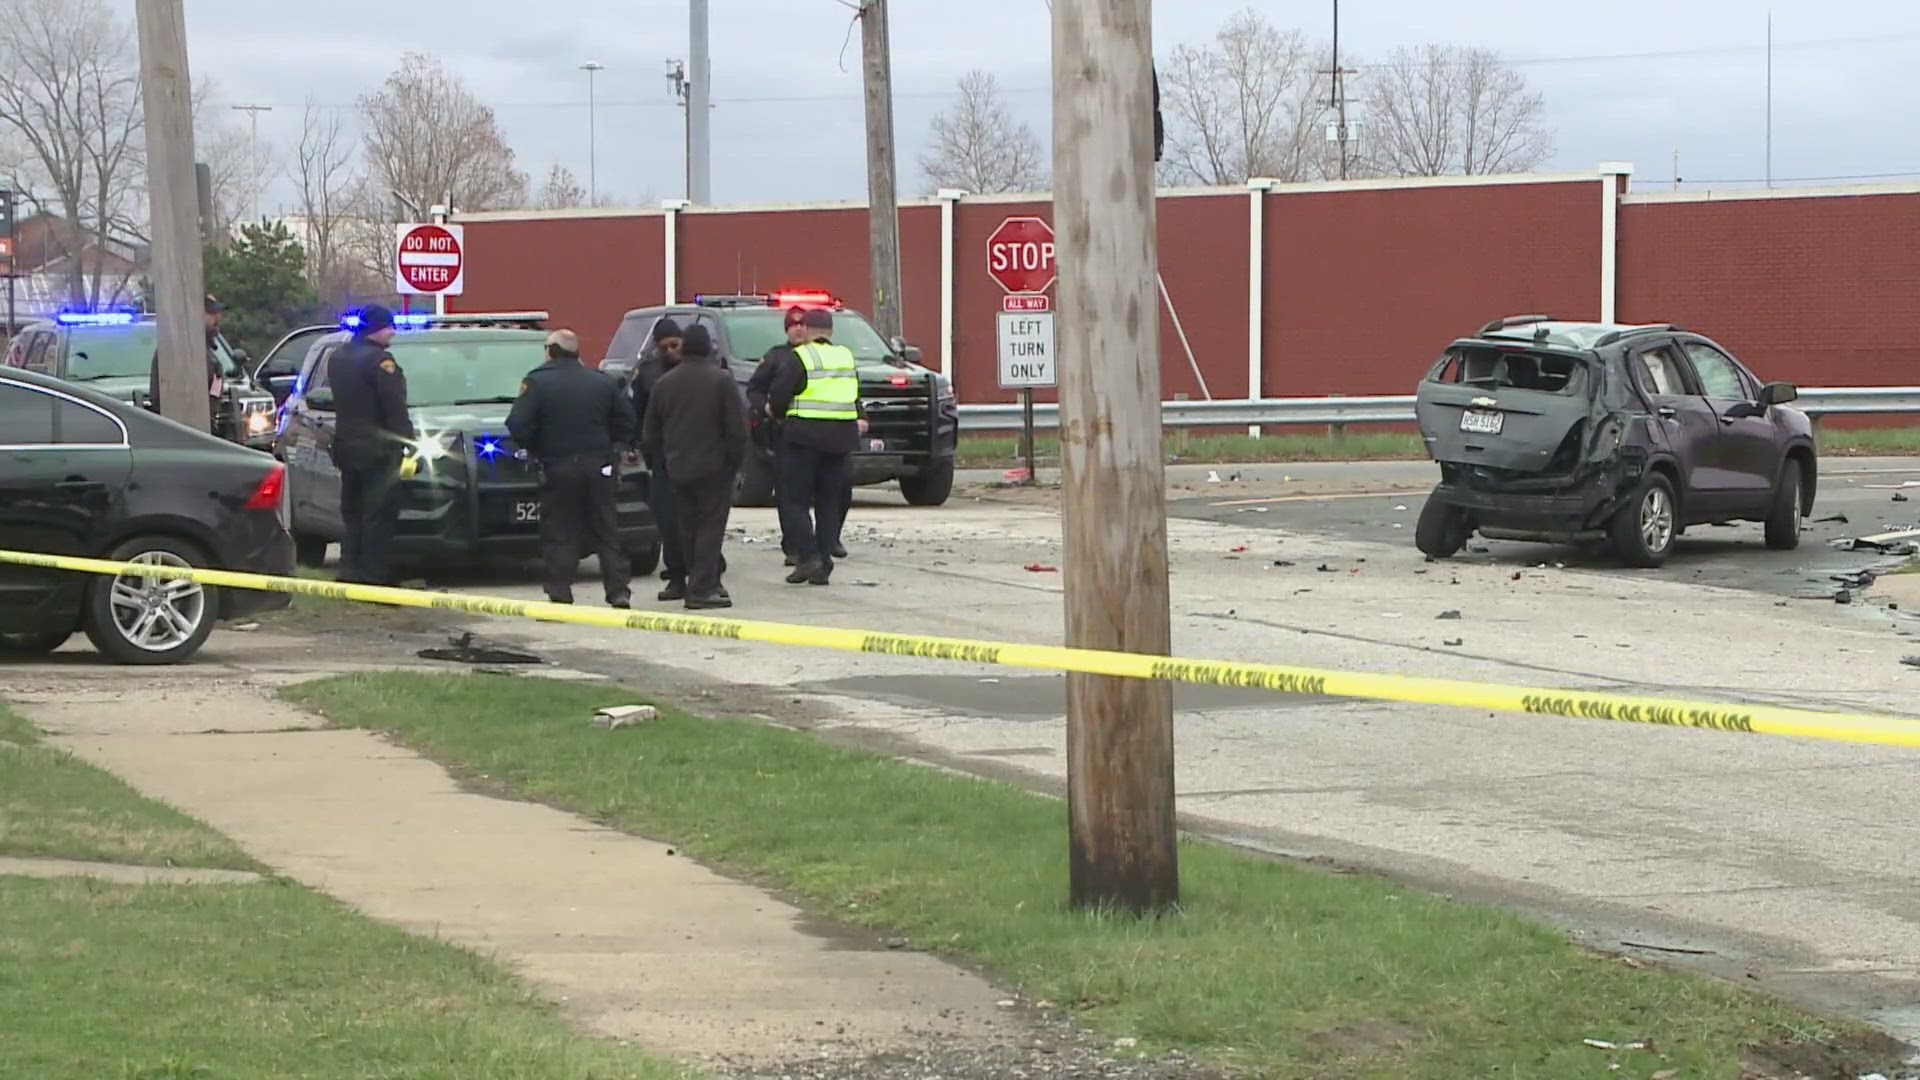 17-Year-Old Cleveland Boy Faces Charges in Fatal Euclid Police Chase